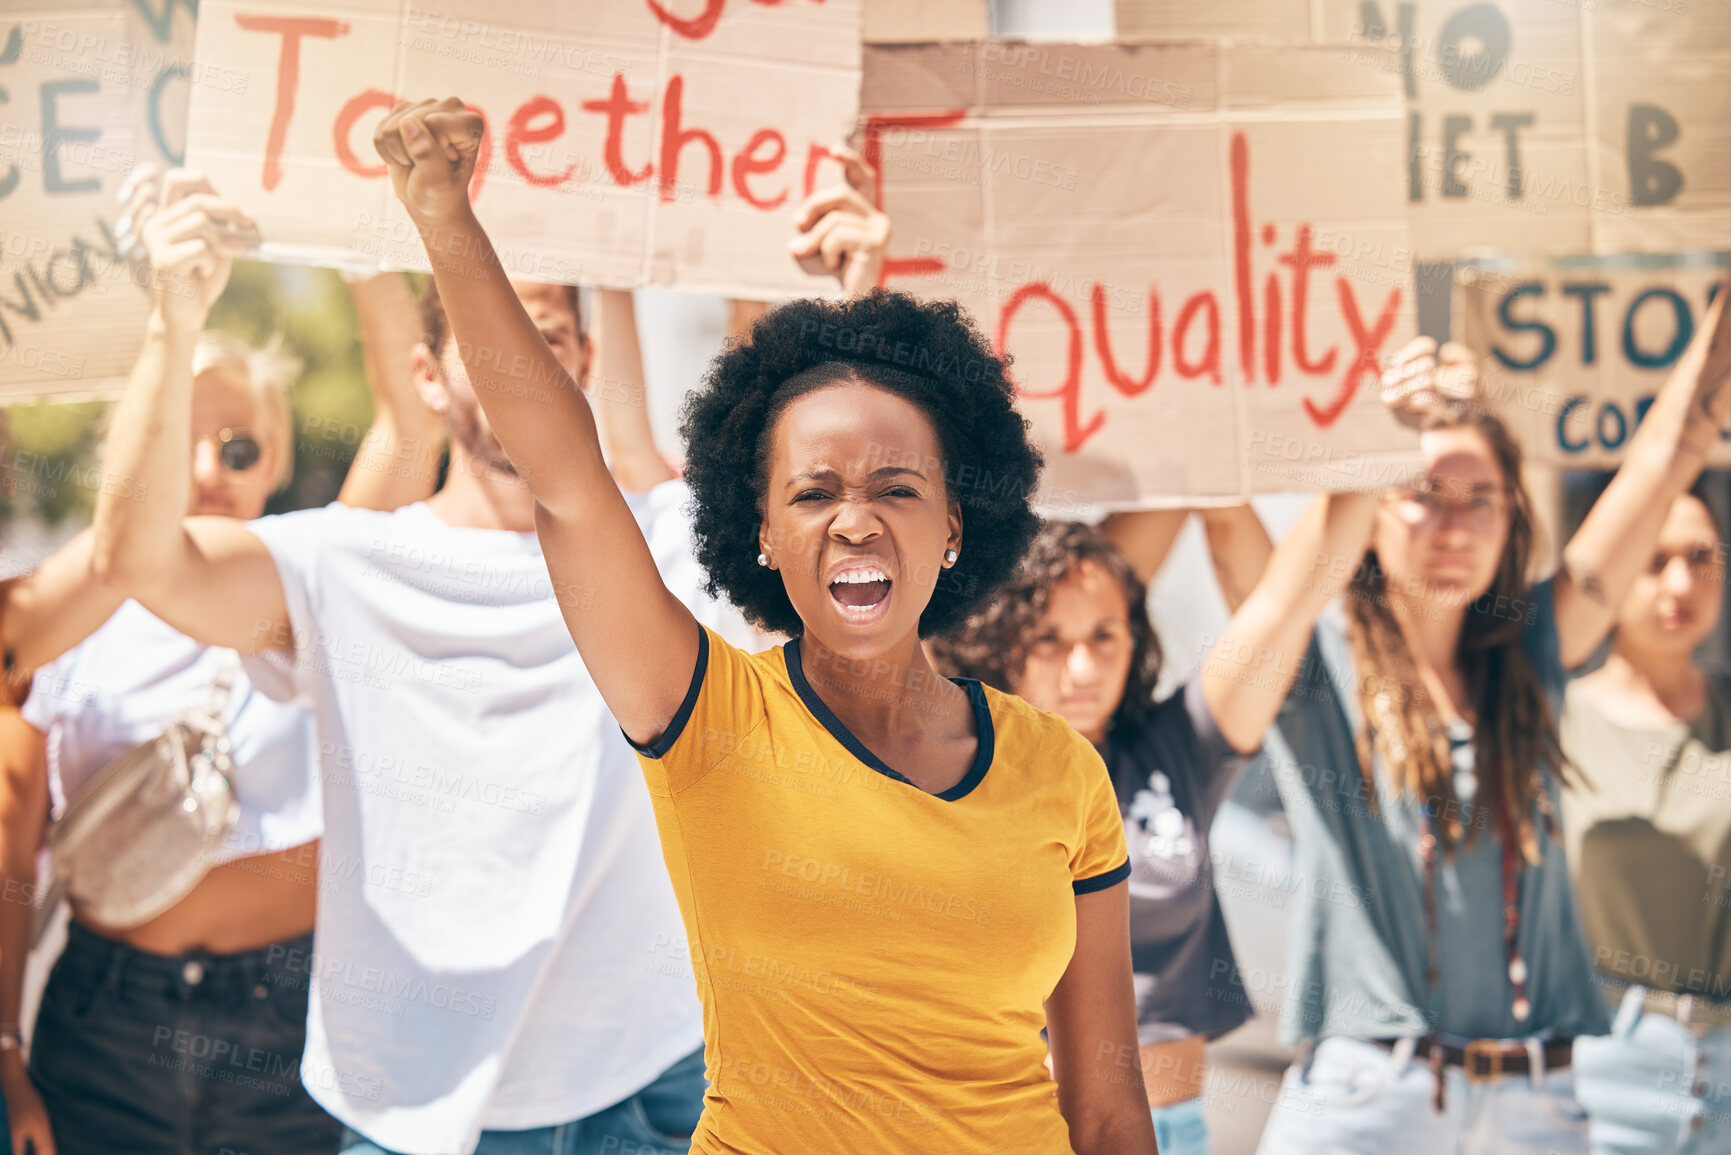 Buy stock photo Protest, crowd of people and black woman in the street, fist in air marching for equality, human rights and freedom. Diversity, protesting and woman shouting for justice in city with cardboard signs